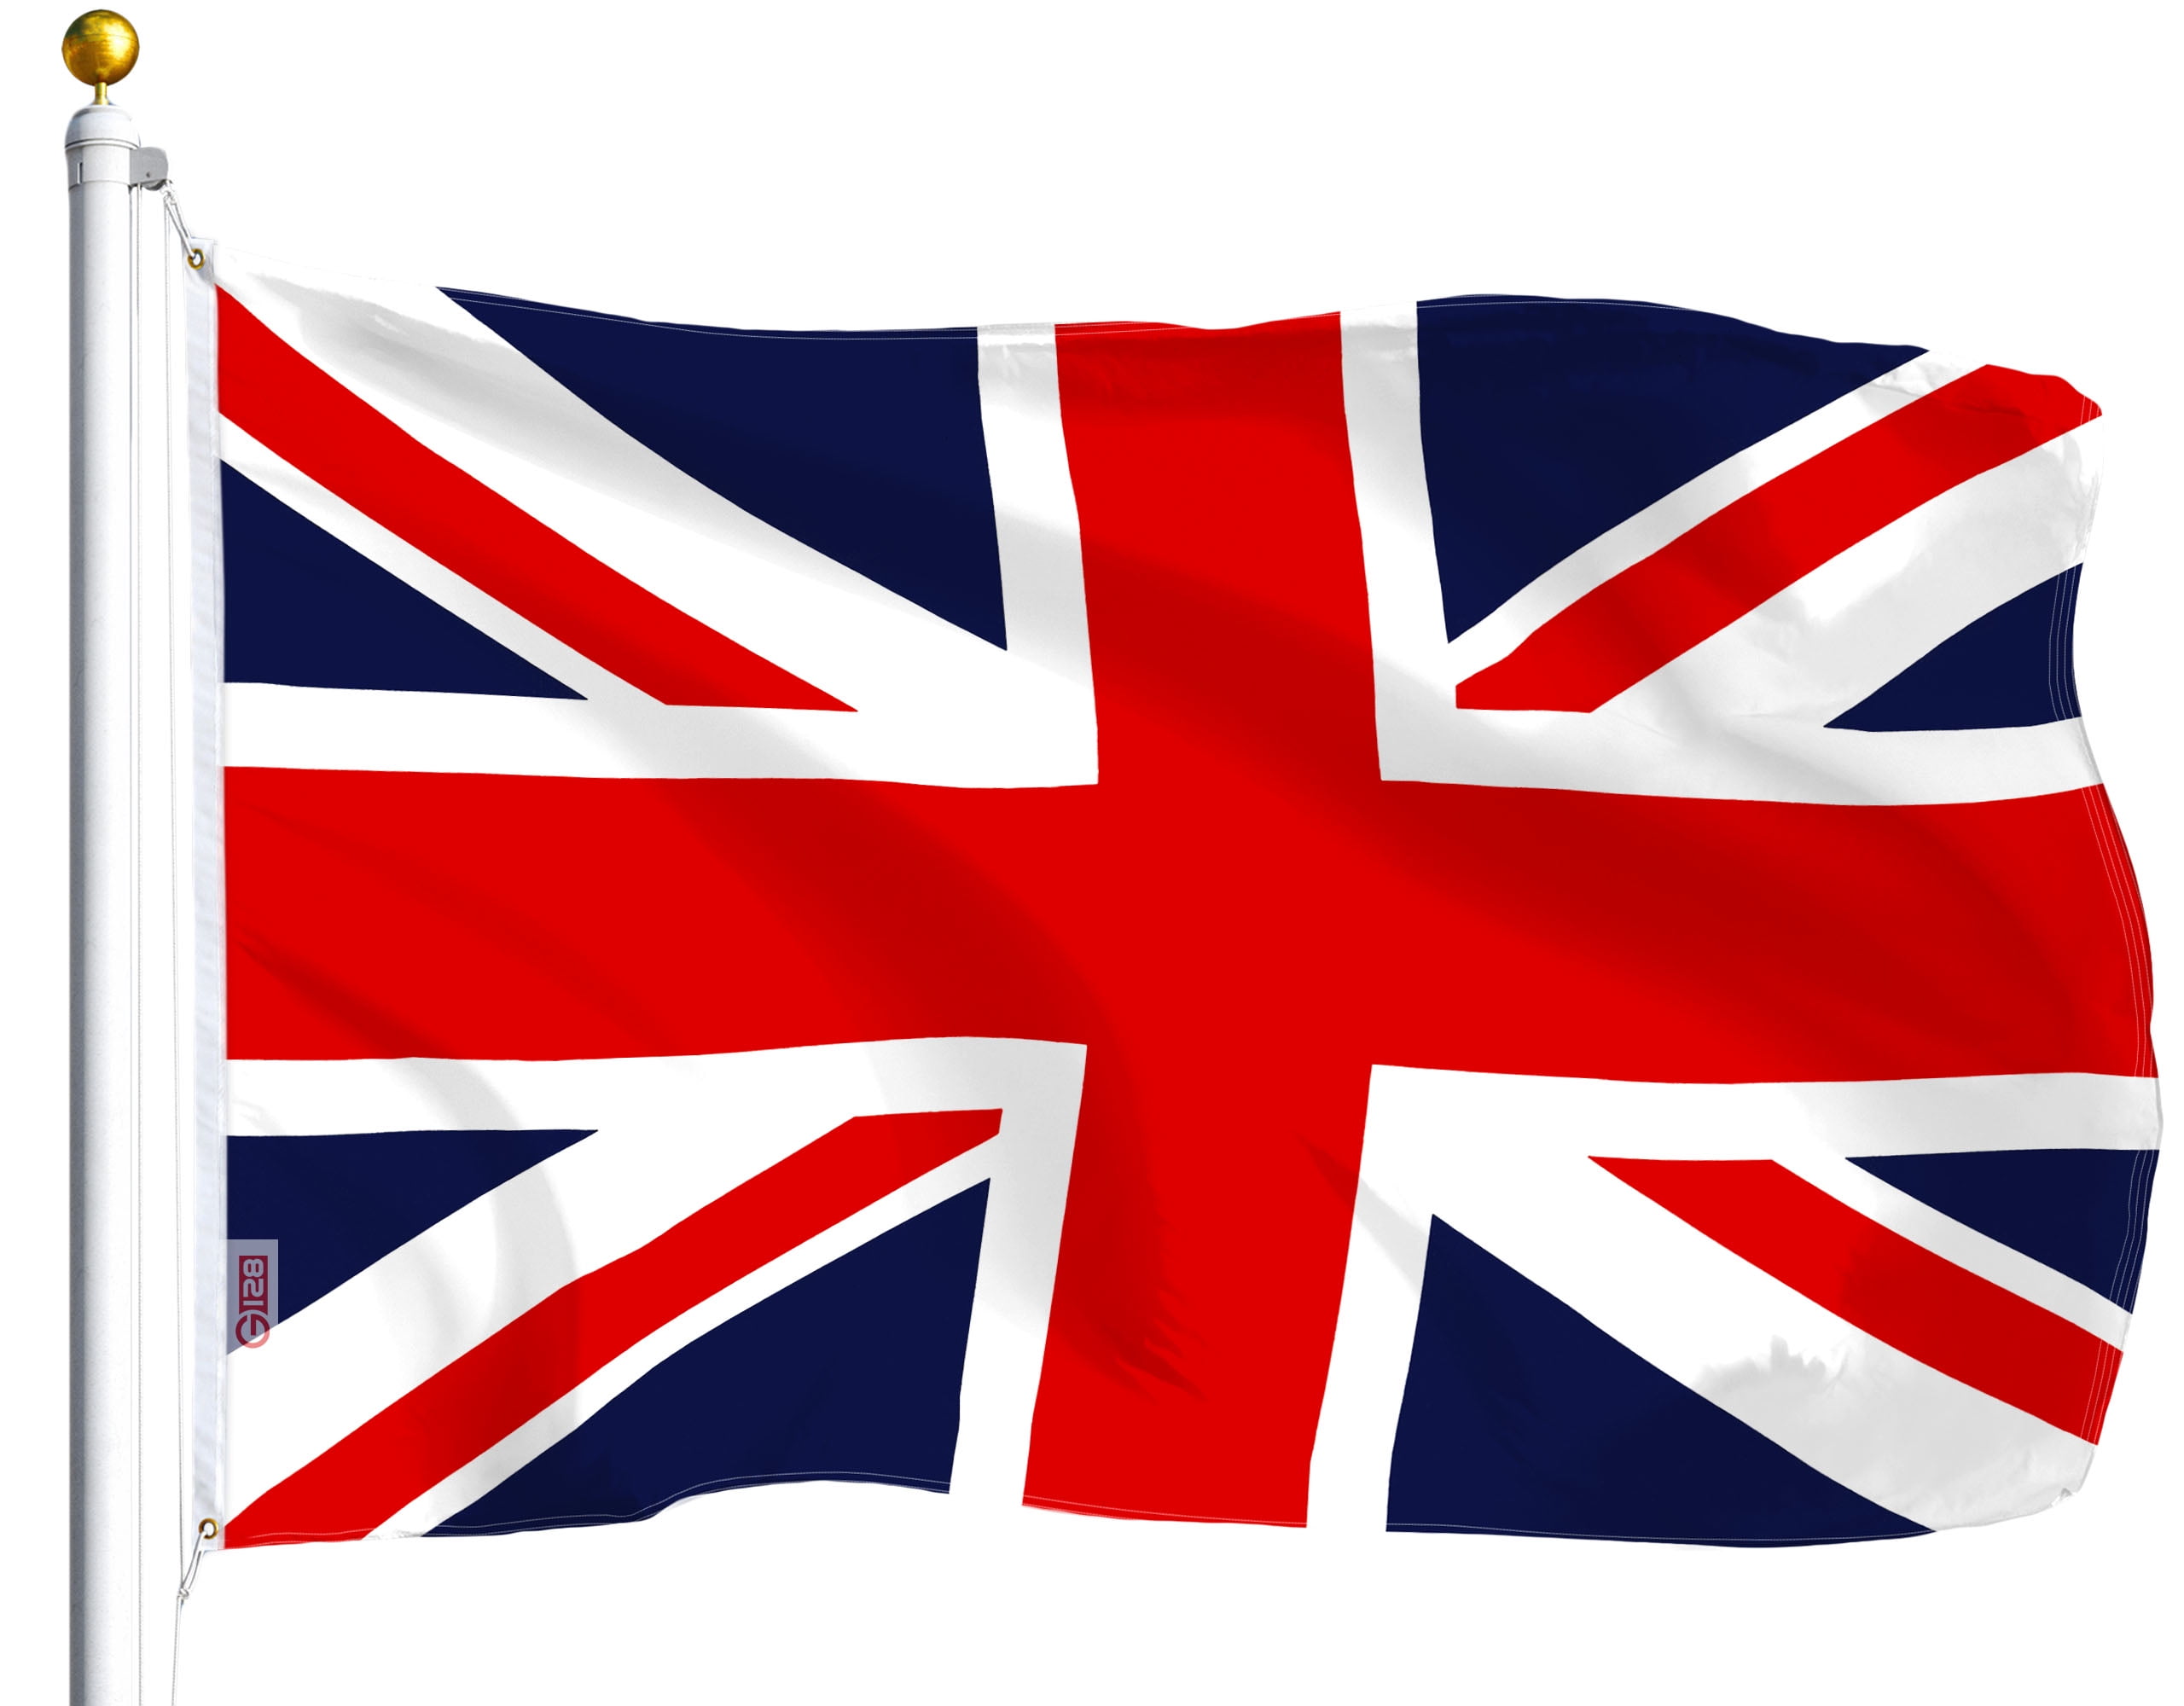 When Was The Union Jack Flag Created?